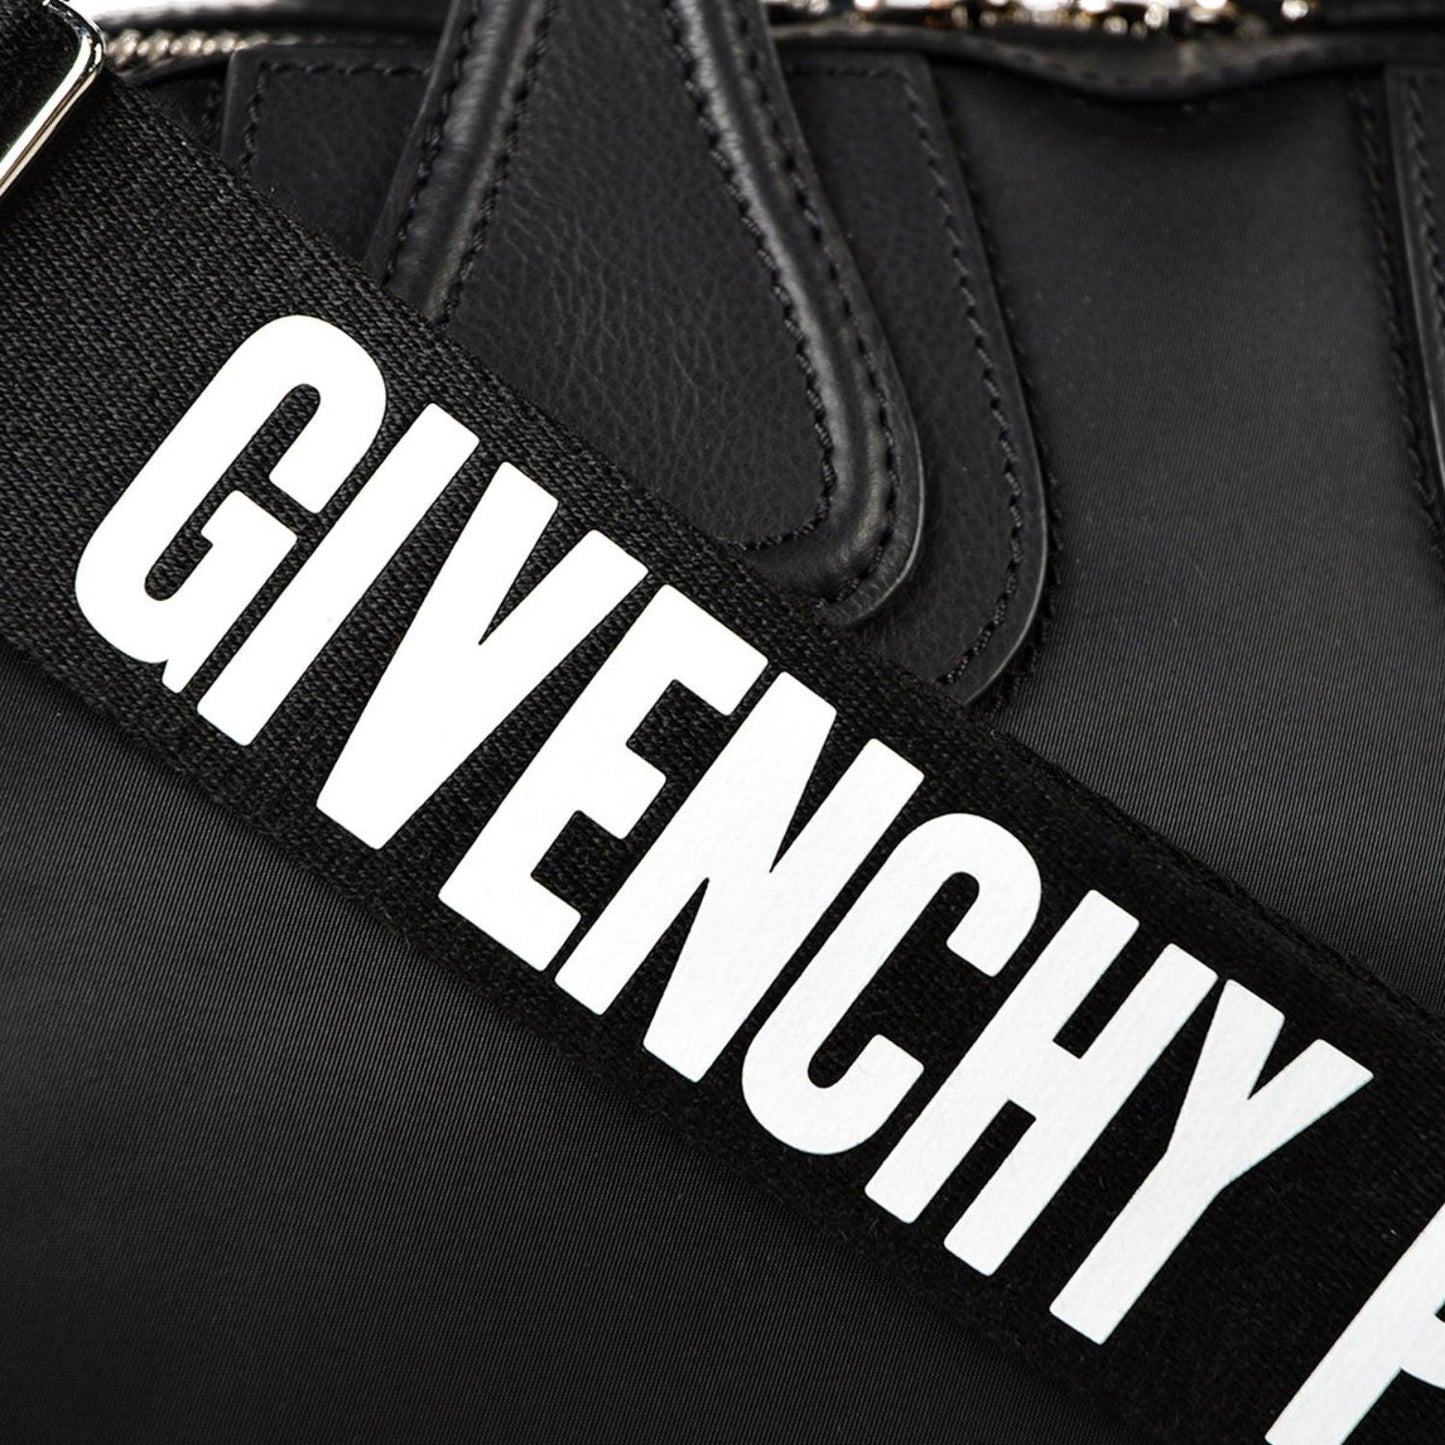 Givenchy Nightingale Small Model Handbag In Black Leather